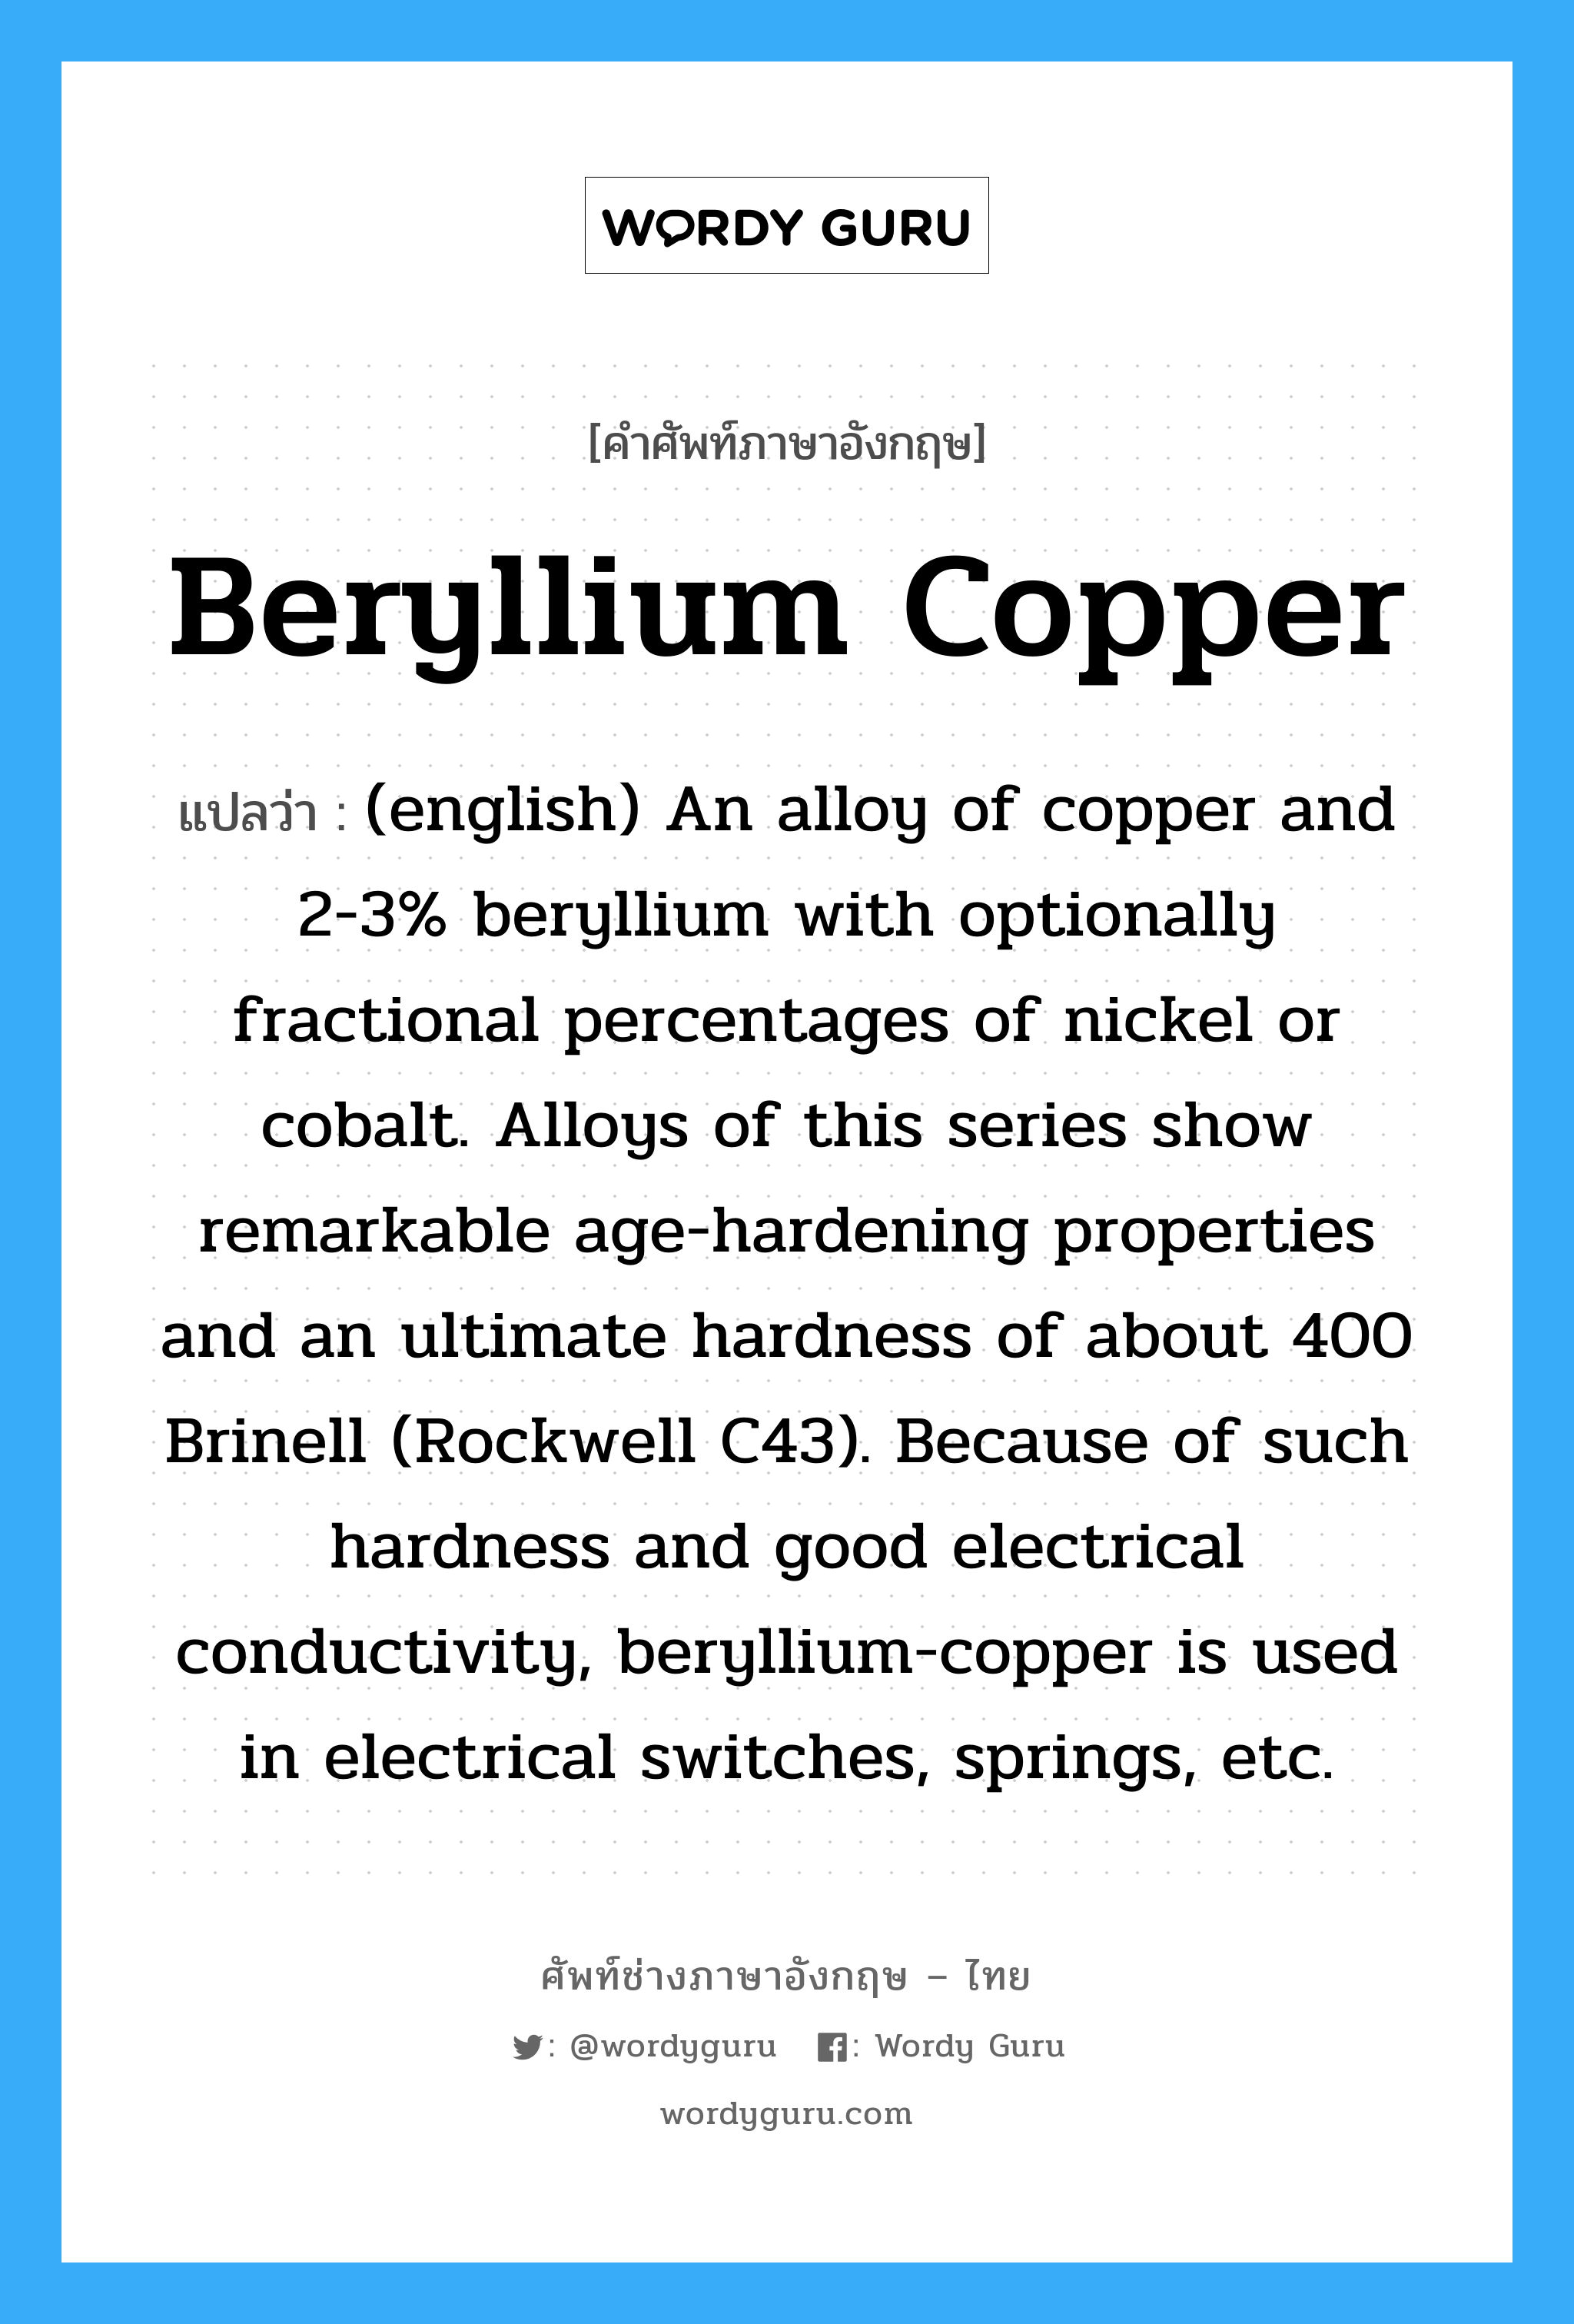 Beryllium Copper แปลว่า?, คำศัพท์ช่างภาษาอังกฤษ - ไทย Beryllium Copper คำศัพท์ภาษาอังกฤษ Beryllium Copper แปลว่า (english) An alloy of copper and 2-3% beryllium with optionally fractional percentages of nickel or cobalt. Alloys of this series show remarkable age-hardening properties and an ultimate hardness of about 400 Brinell (Rockwell C43). Because of such hardness and good electrical conductivity, beryllium-copper is used in electrical switches, springs, etc.